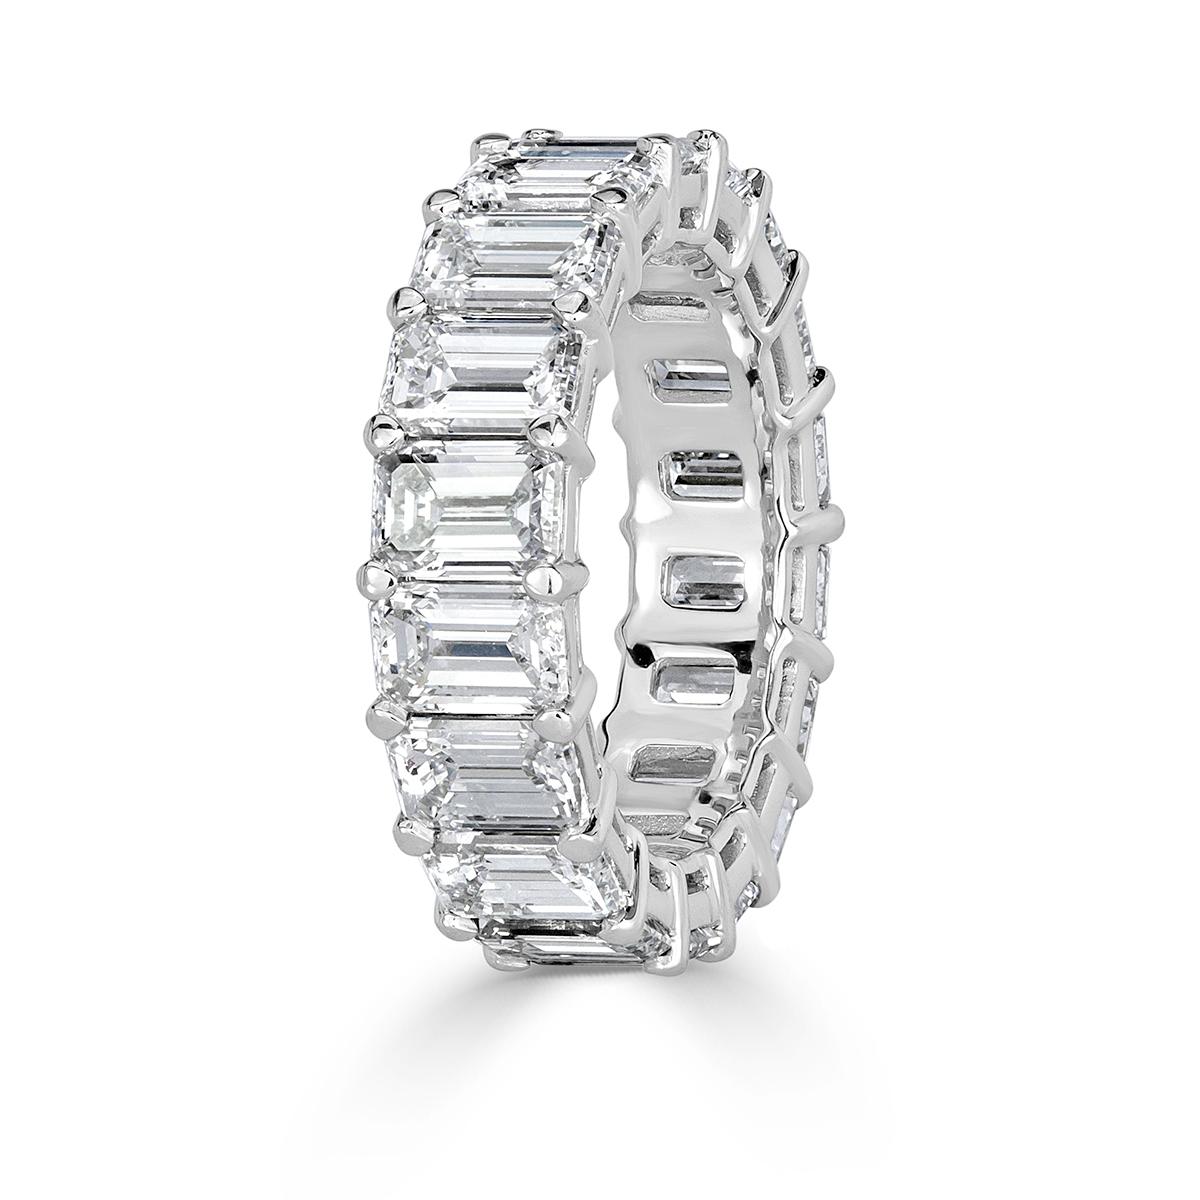 Custom created in platinum, this statement diamond eternity band showcases 9.09ct of emerald cut diamonds graded at E-F, VVS1-VVS2. The diamonds are each hand selected and set in a classic basket setting. All eternity bands are shown in a size 6.5.